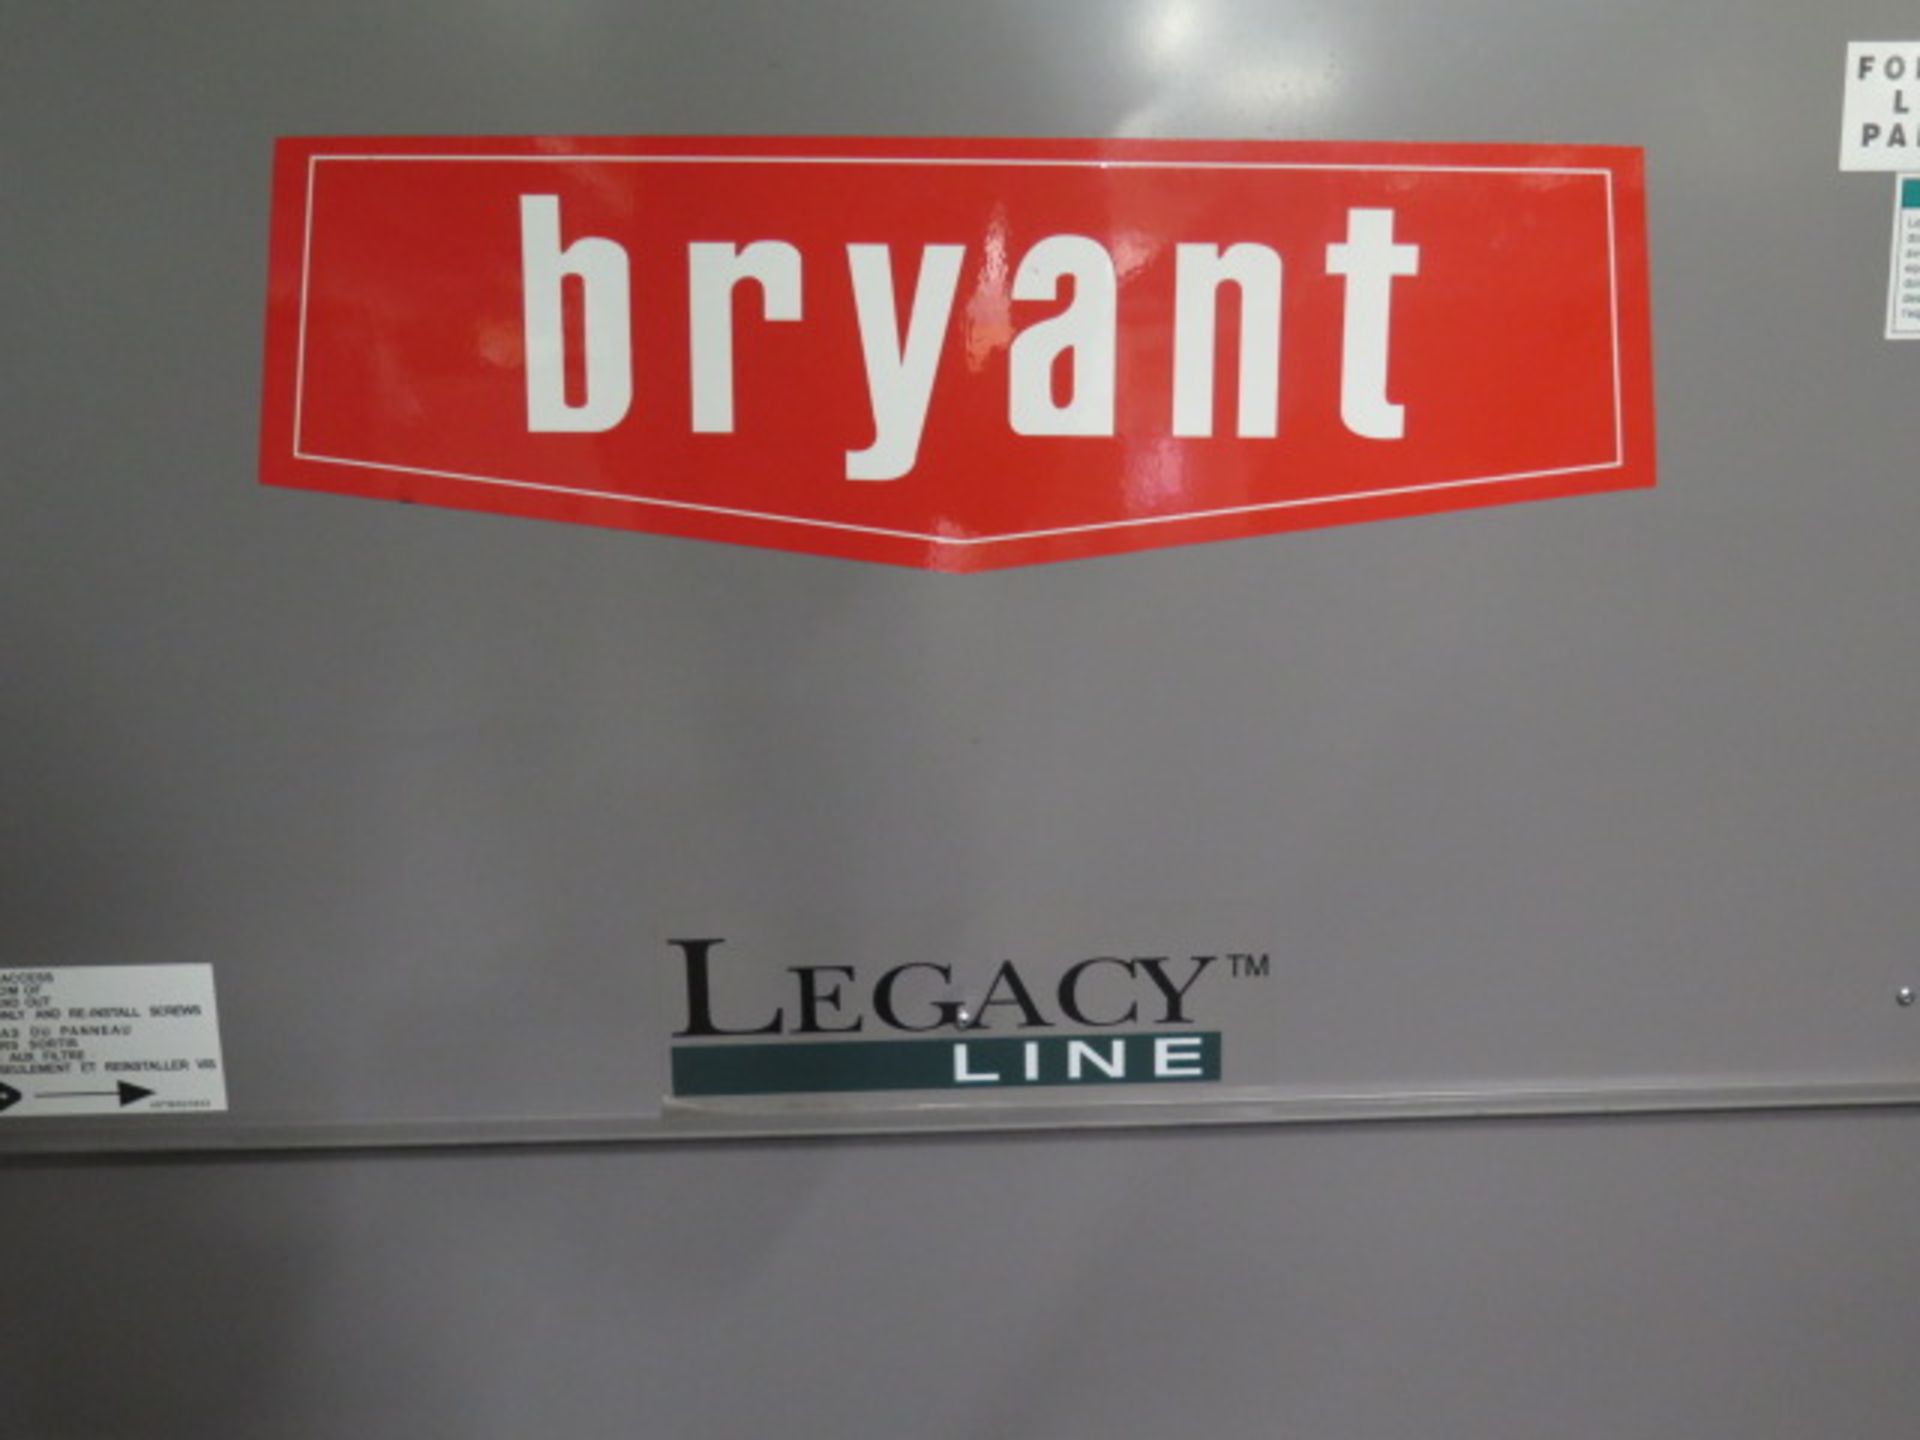 Bryant “Legacy Line” 547JE06A000A2A0AAA 5 Ton Heat Pump 460V-3ph - Image 4 of 5